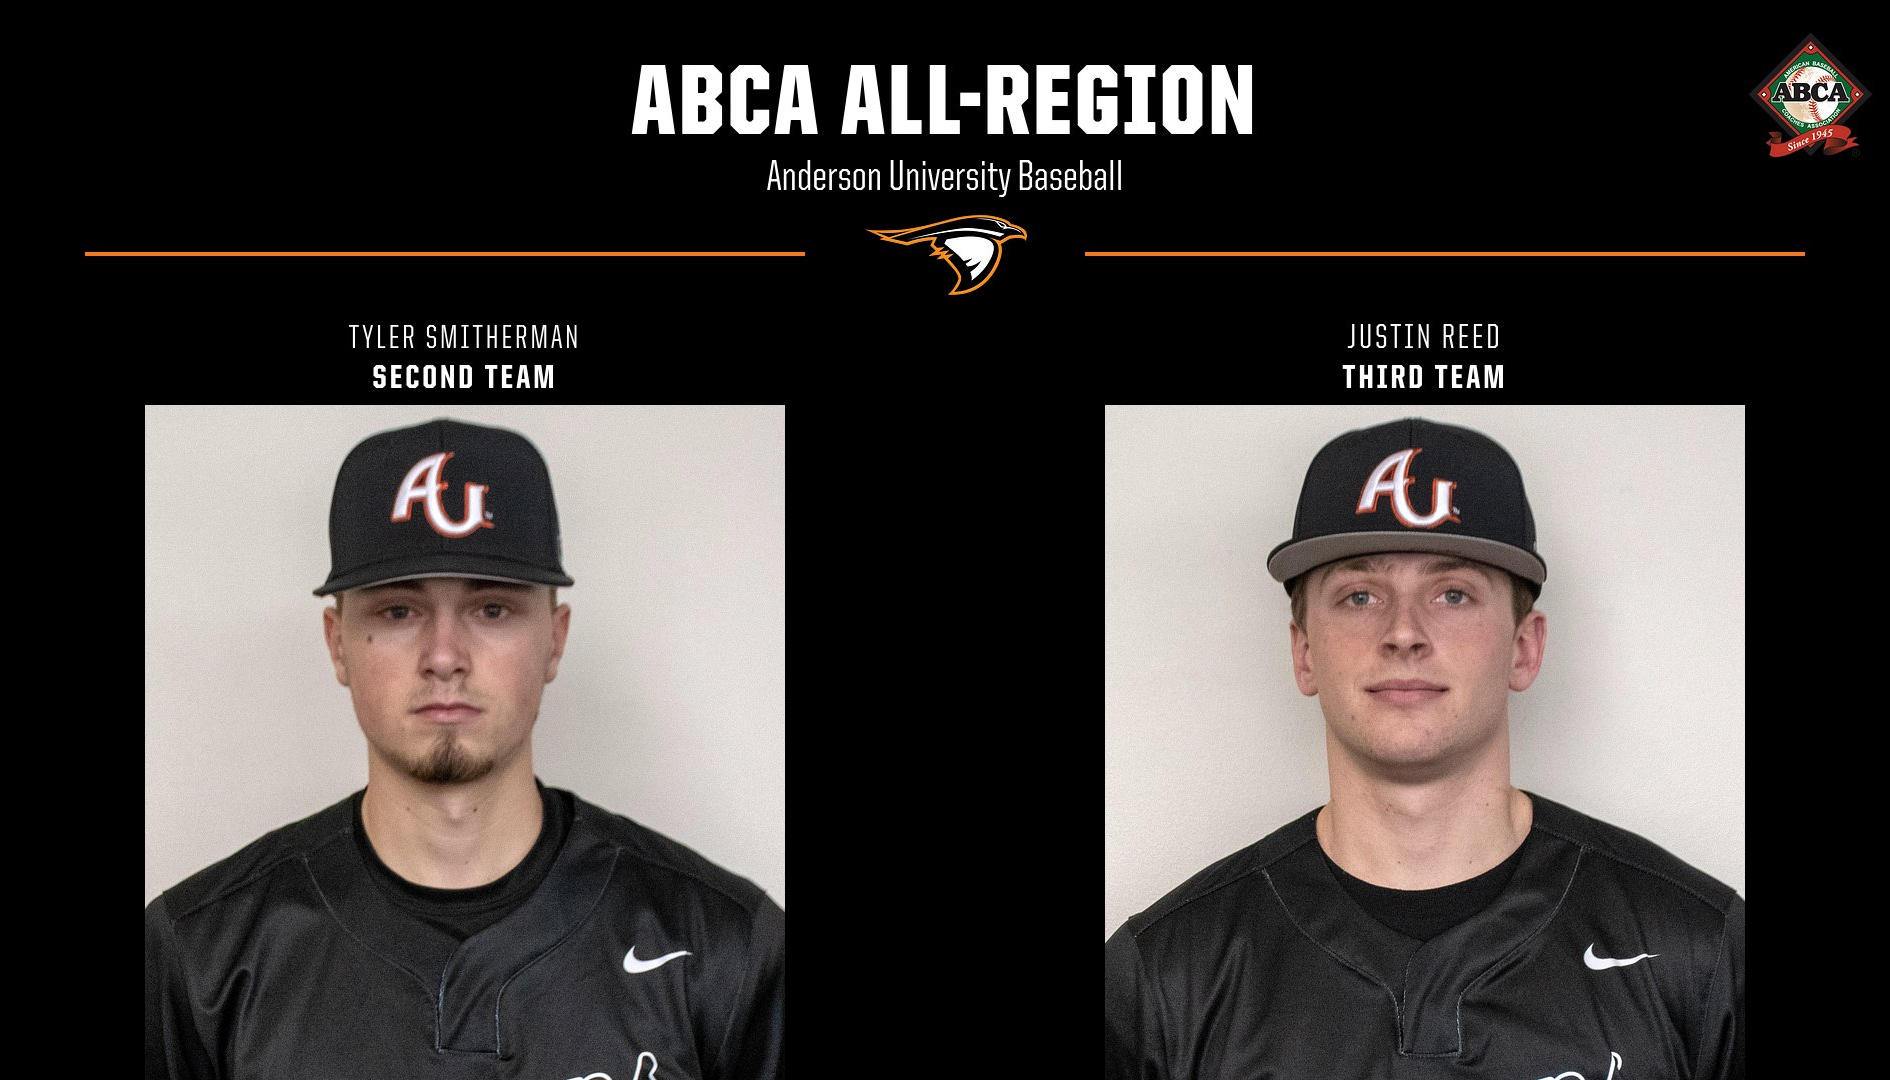 Smitherman, Reed Earns ABCA All-Region Honors